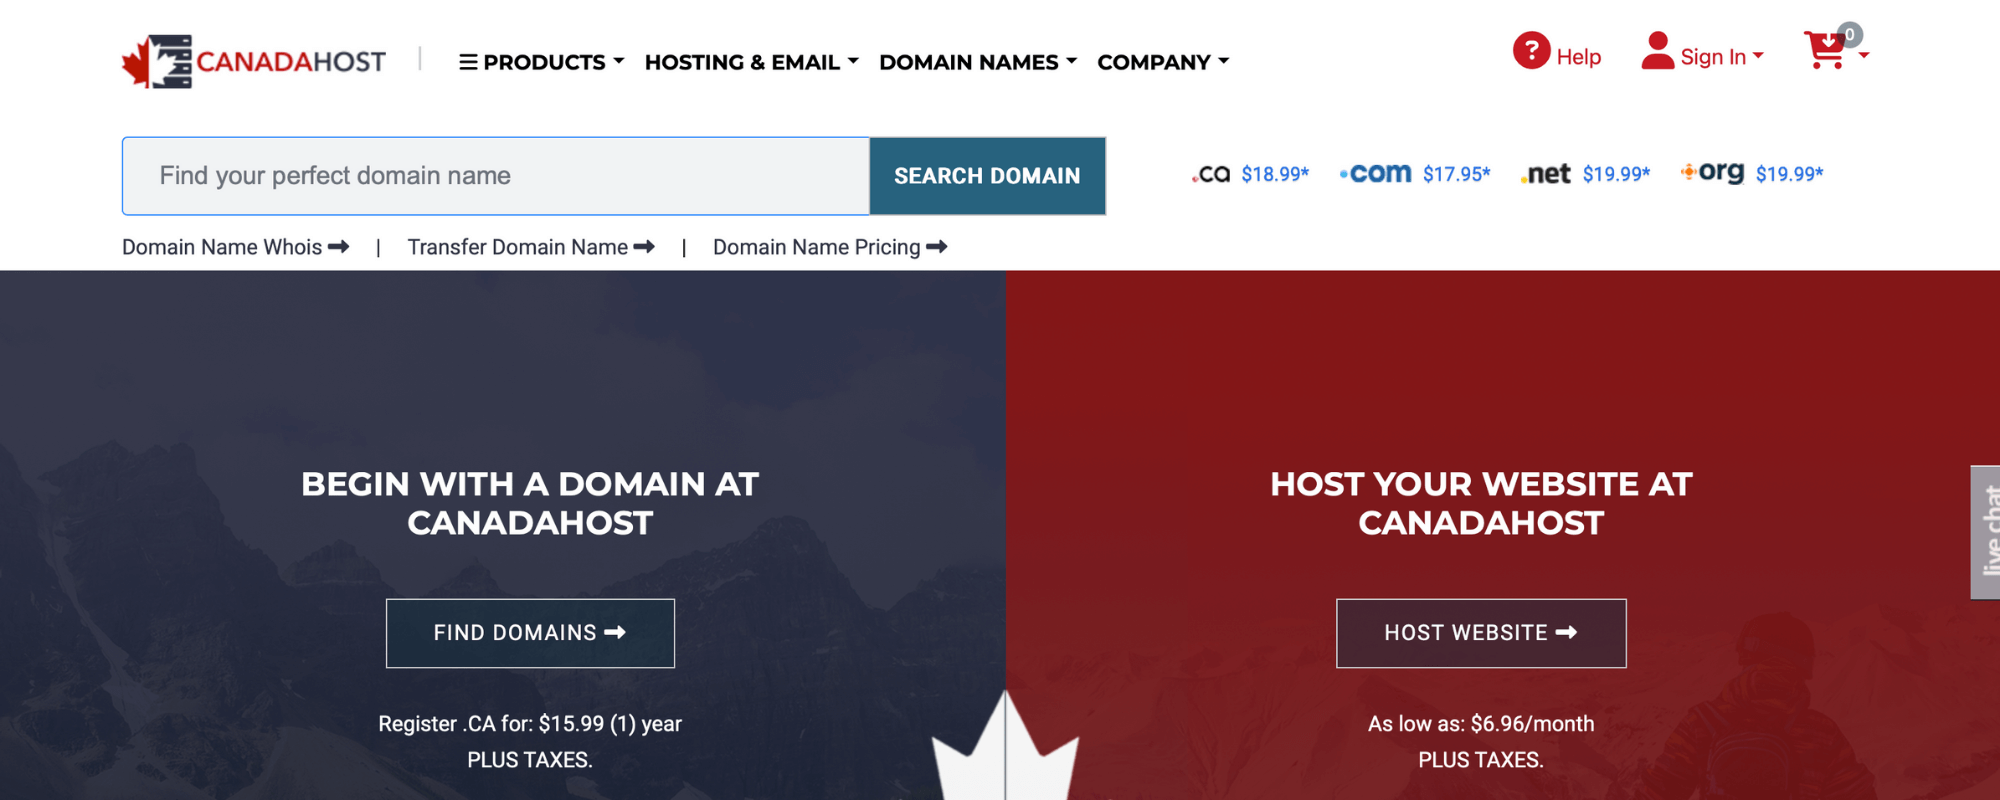 Hosting Services in Canada – Top 5 – Canada Host